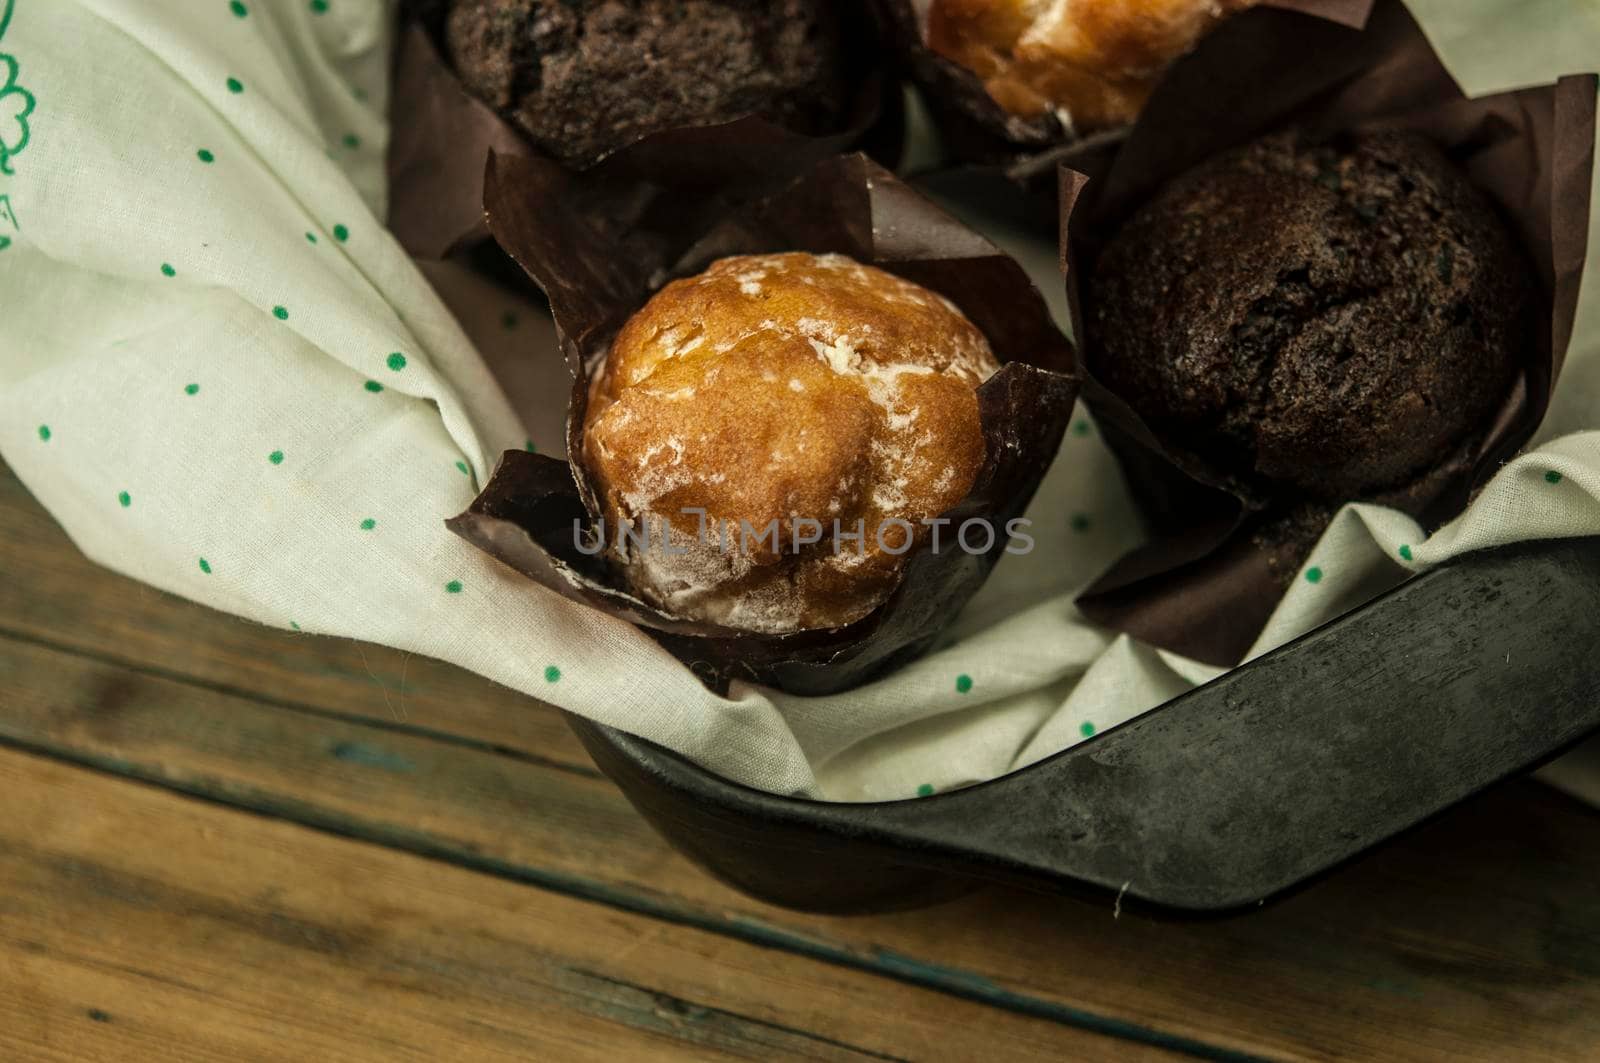 Homemade chocolate and vanilla cupcakes on a wooden table, sprinkled with powdered sugar. Breakfast by inxti